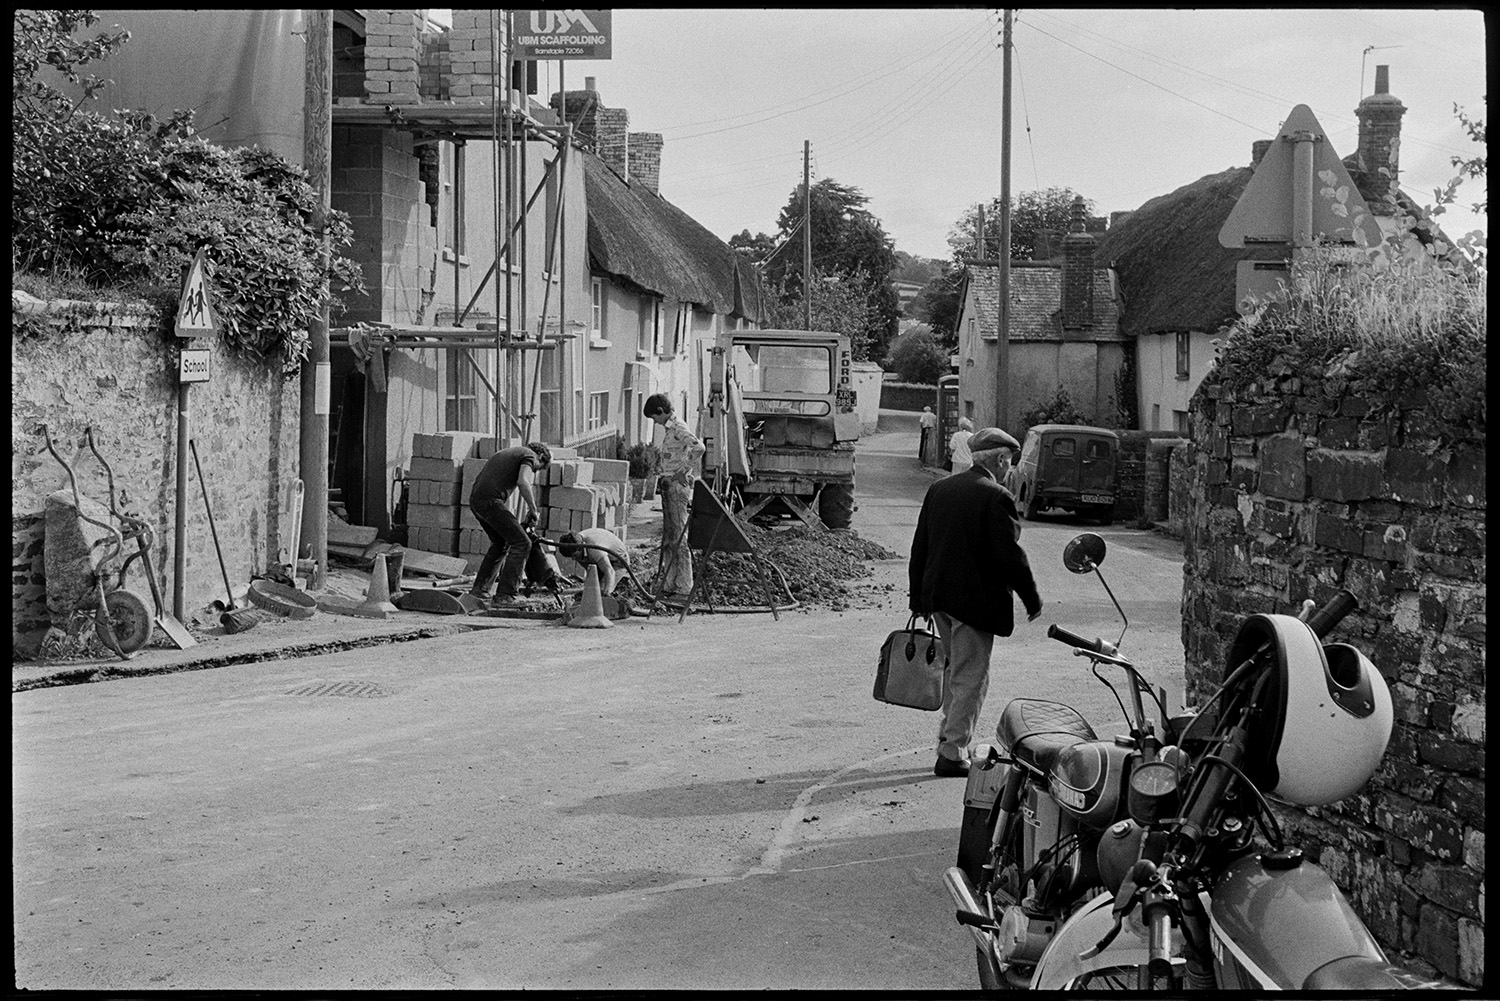 Street scenes, woman sweeping pavement. 
[Men digging up the road outside a house with scaffolding in Fore Street, Dolton. A man carrying a bag is walking by and a motorbike is parked in the foreground.]